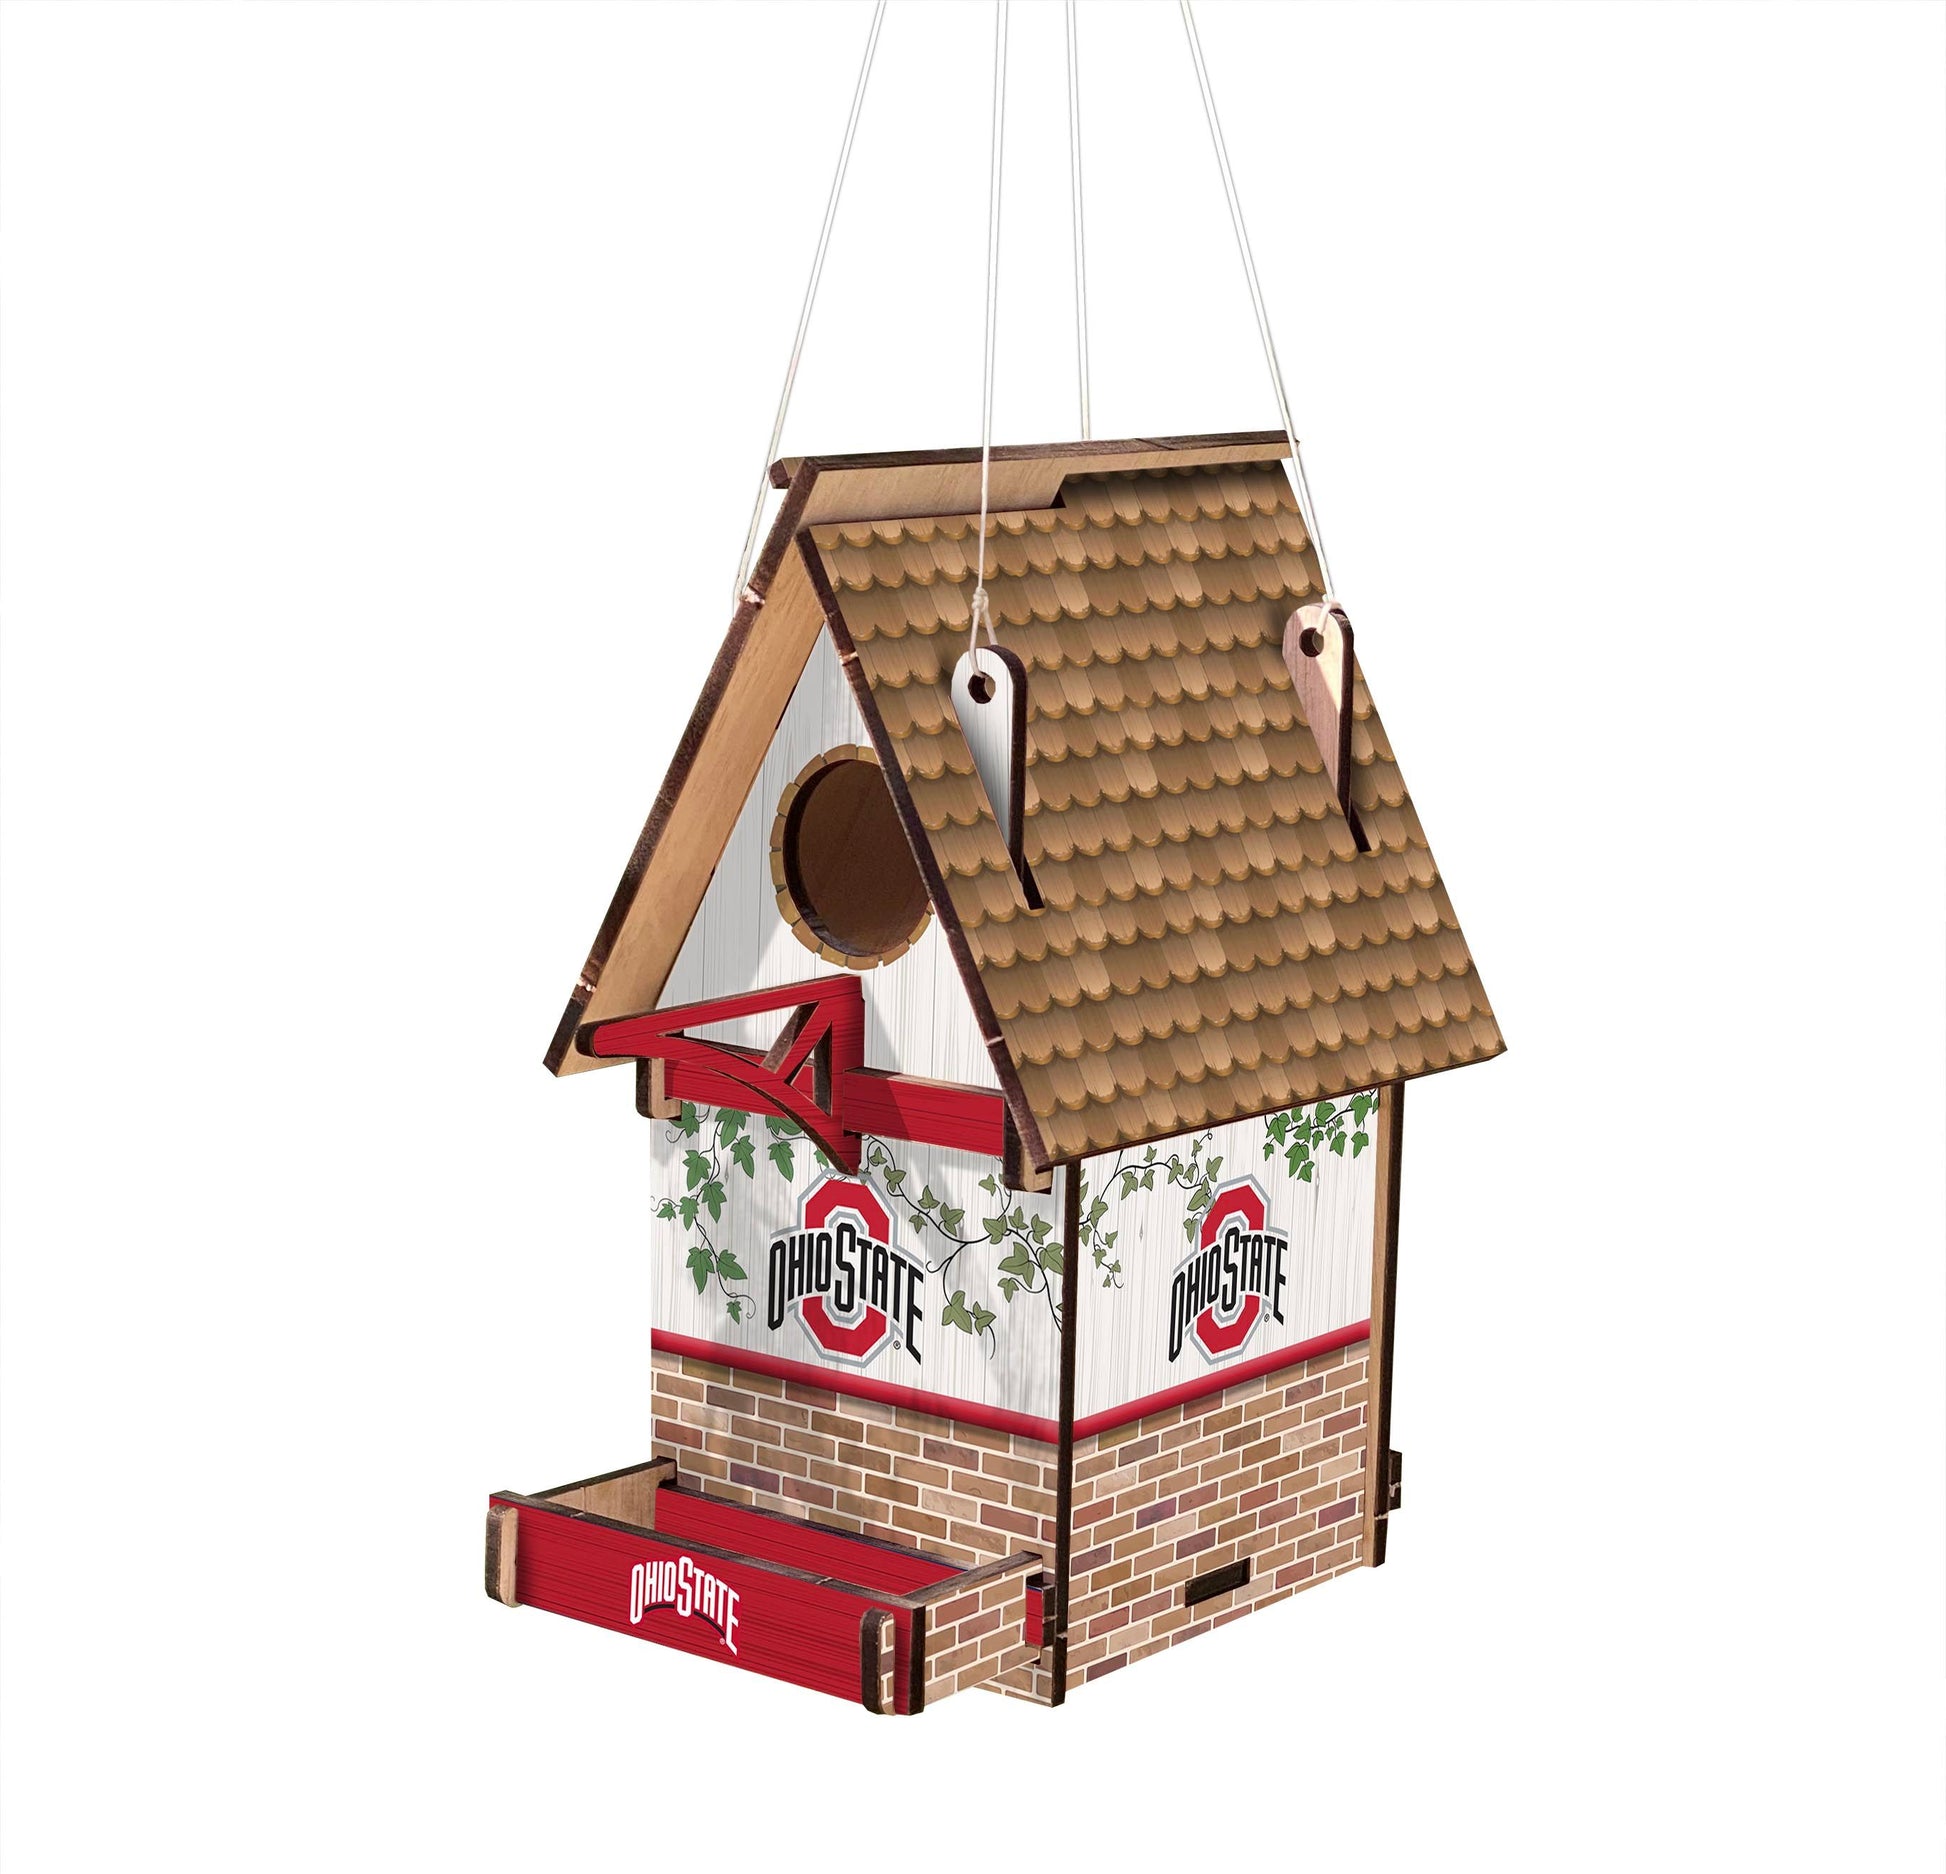 Support your Ohio State Buckeyes with this sturdy wood birdhouse, proudly made in the USA. It's 15"x15", with vibrant team graphics and colors, perfect for showing your school spirit. 